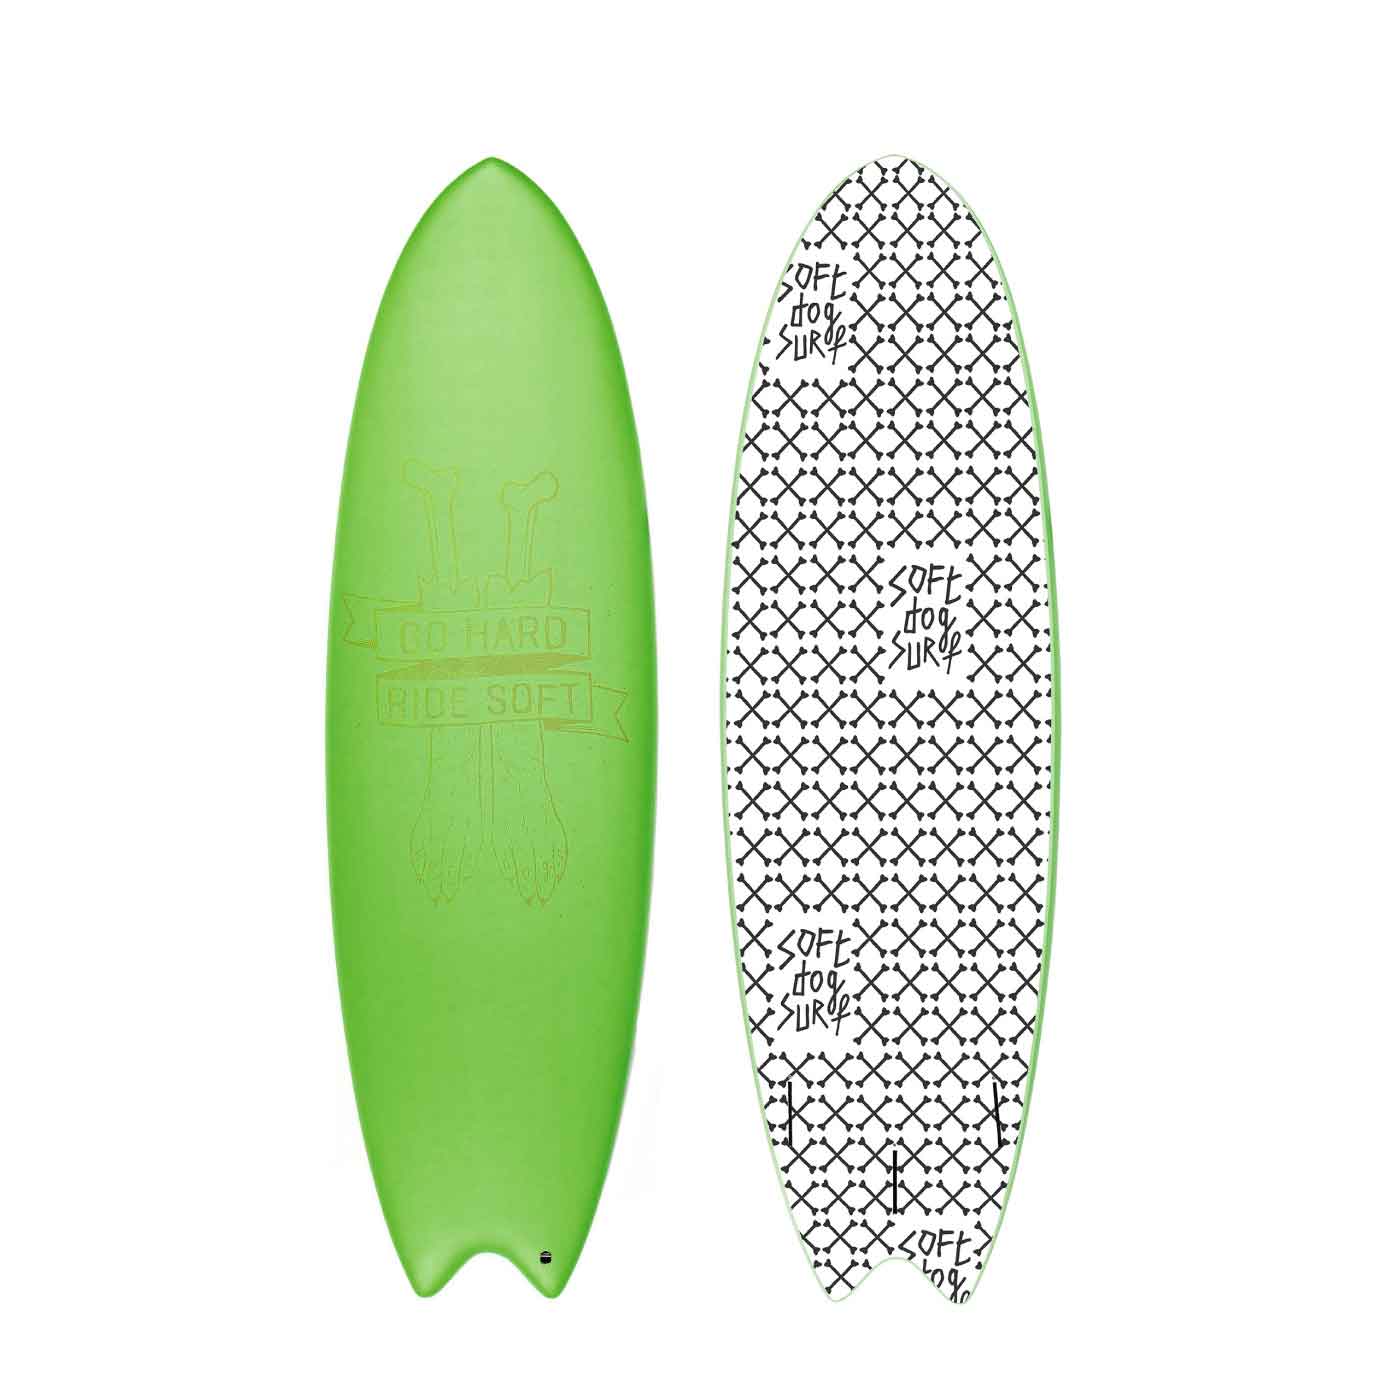 Boxer 6'6 | Soft Top Surfboard